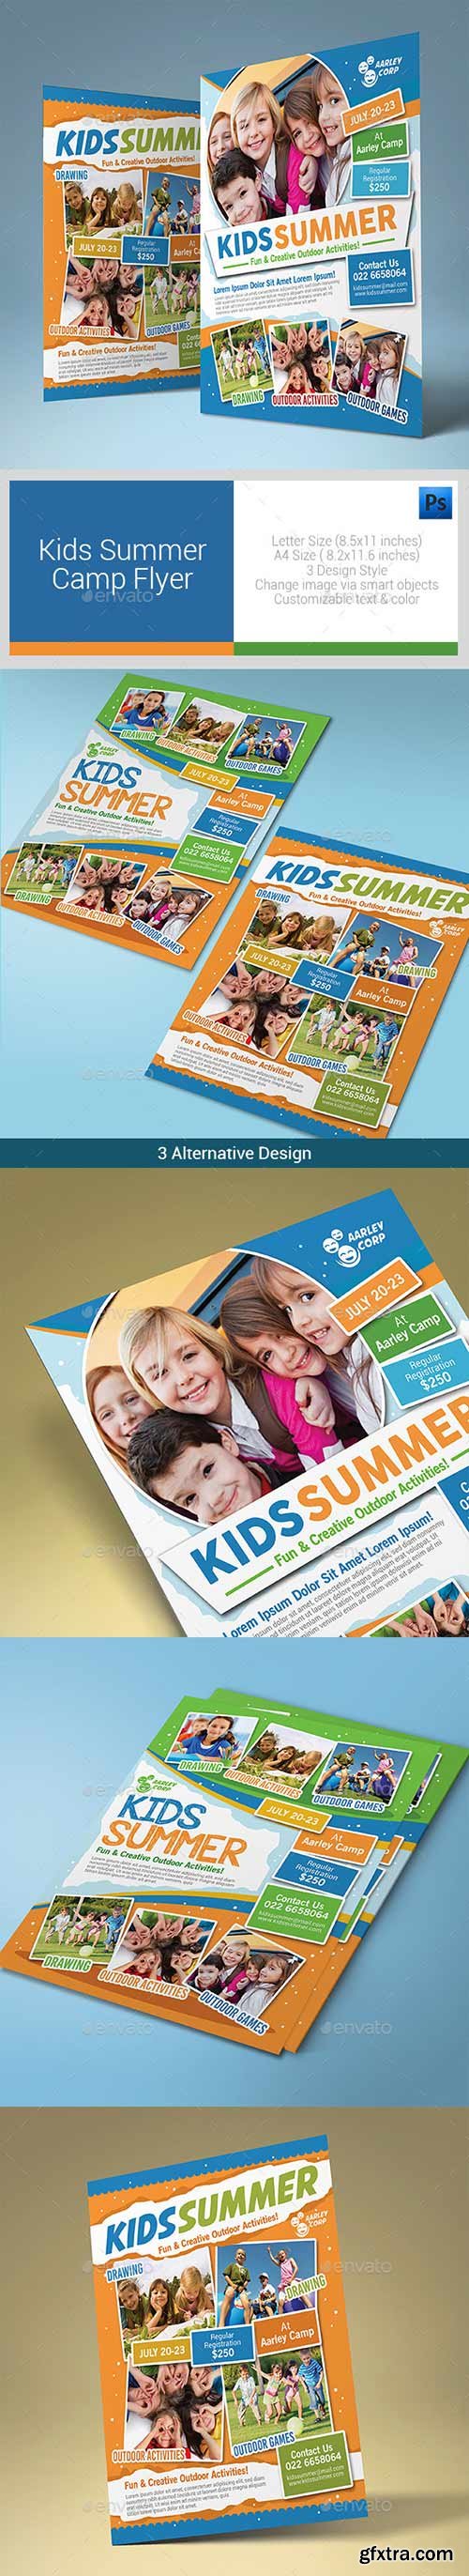 Graphicriver - Kids Summer Camp Flyers 10131796